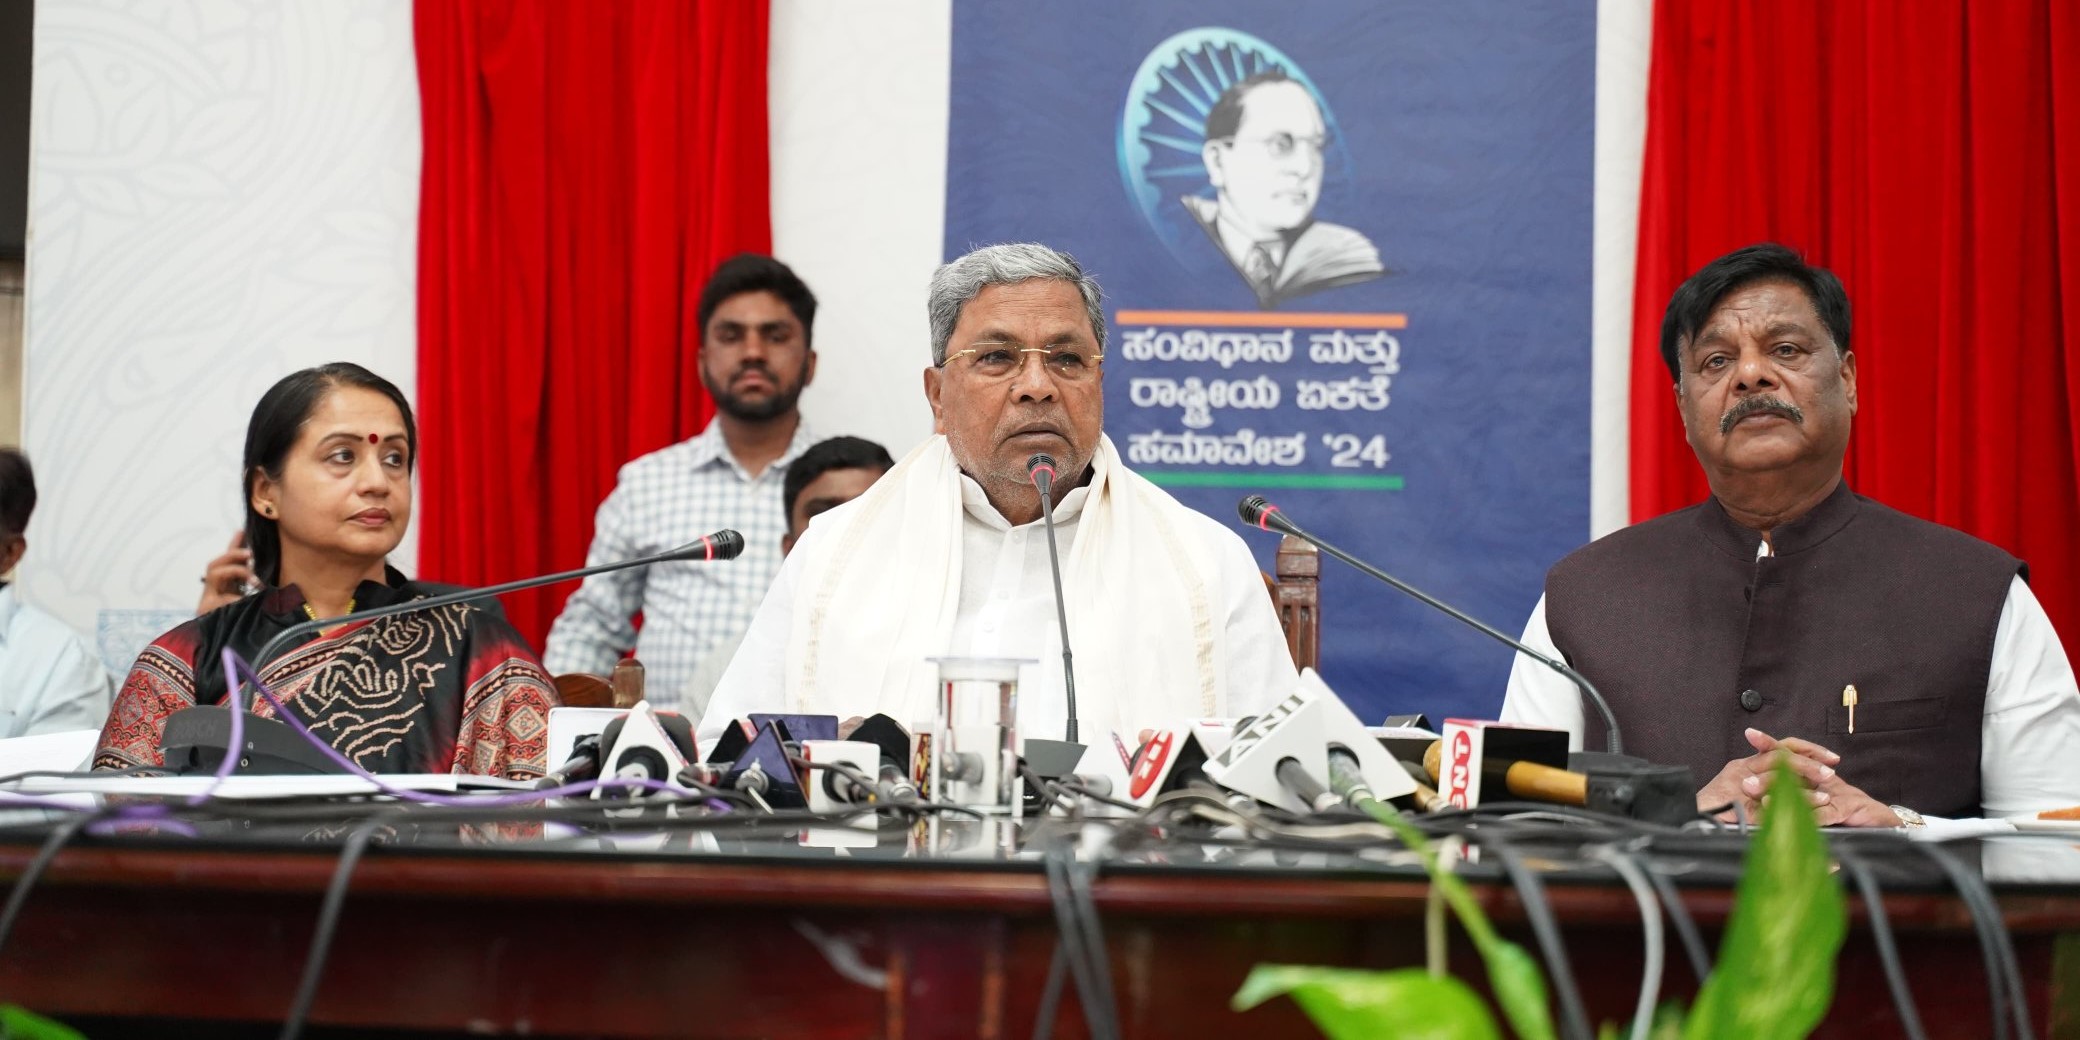 CM Siddaramaih rubbishes exit polls, says Cong will win 15-20 seats in State